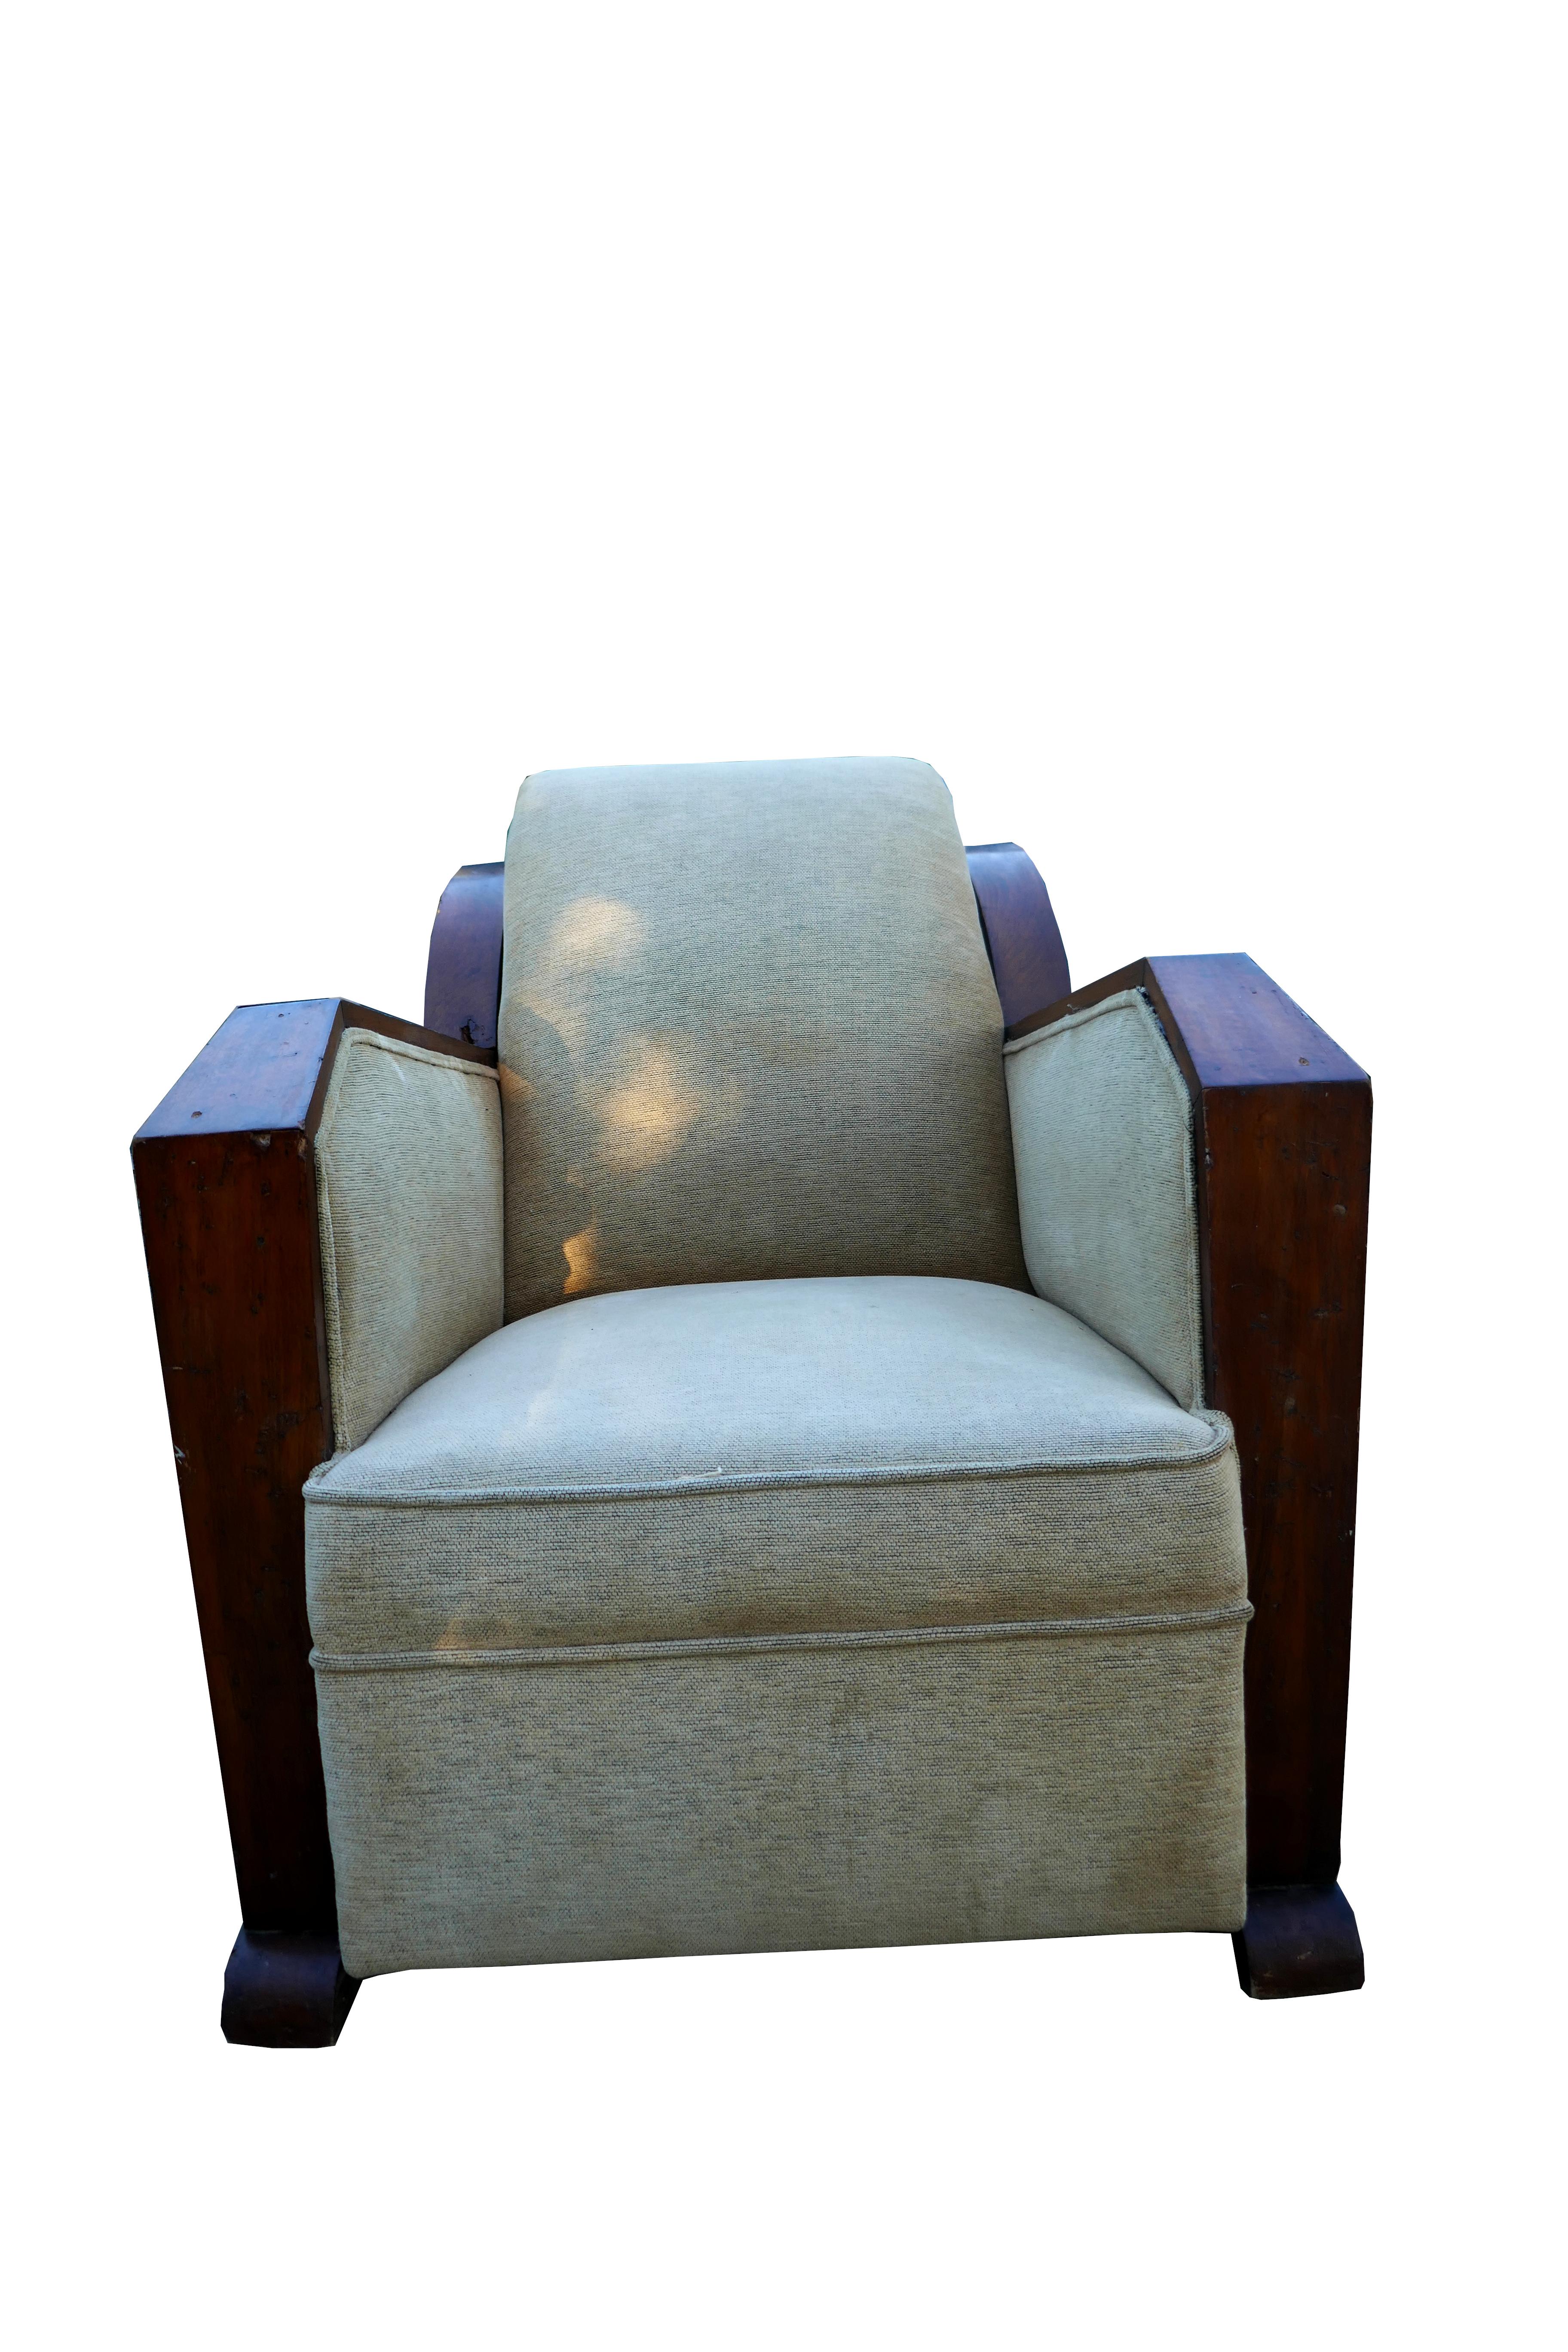 Early 20th Century French Art Deco armchair, possible Maison Dominique  For Sale